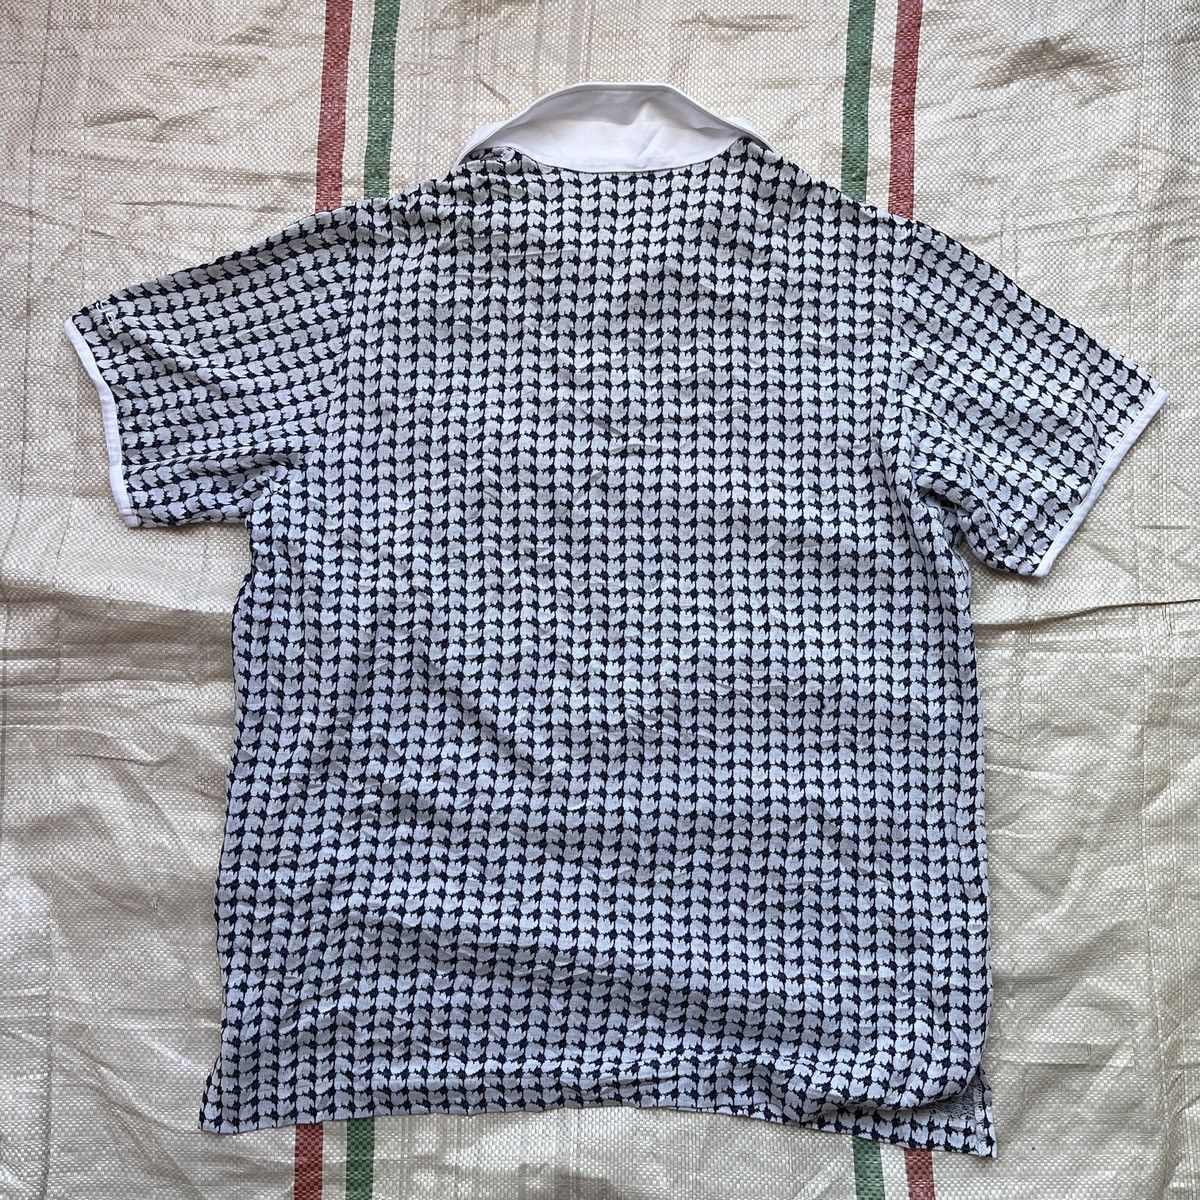 Vintage Monogram Courreges Polo Shirts Made In Japan - 17